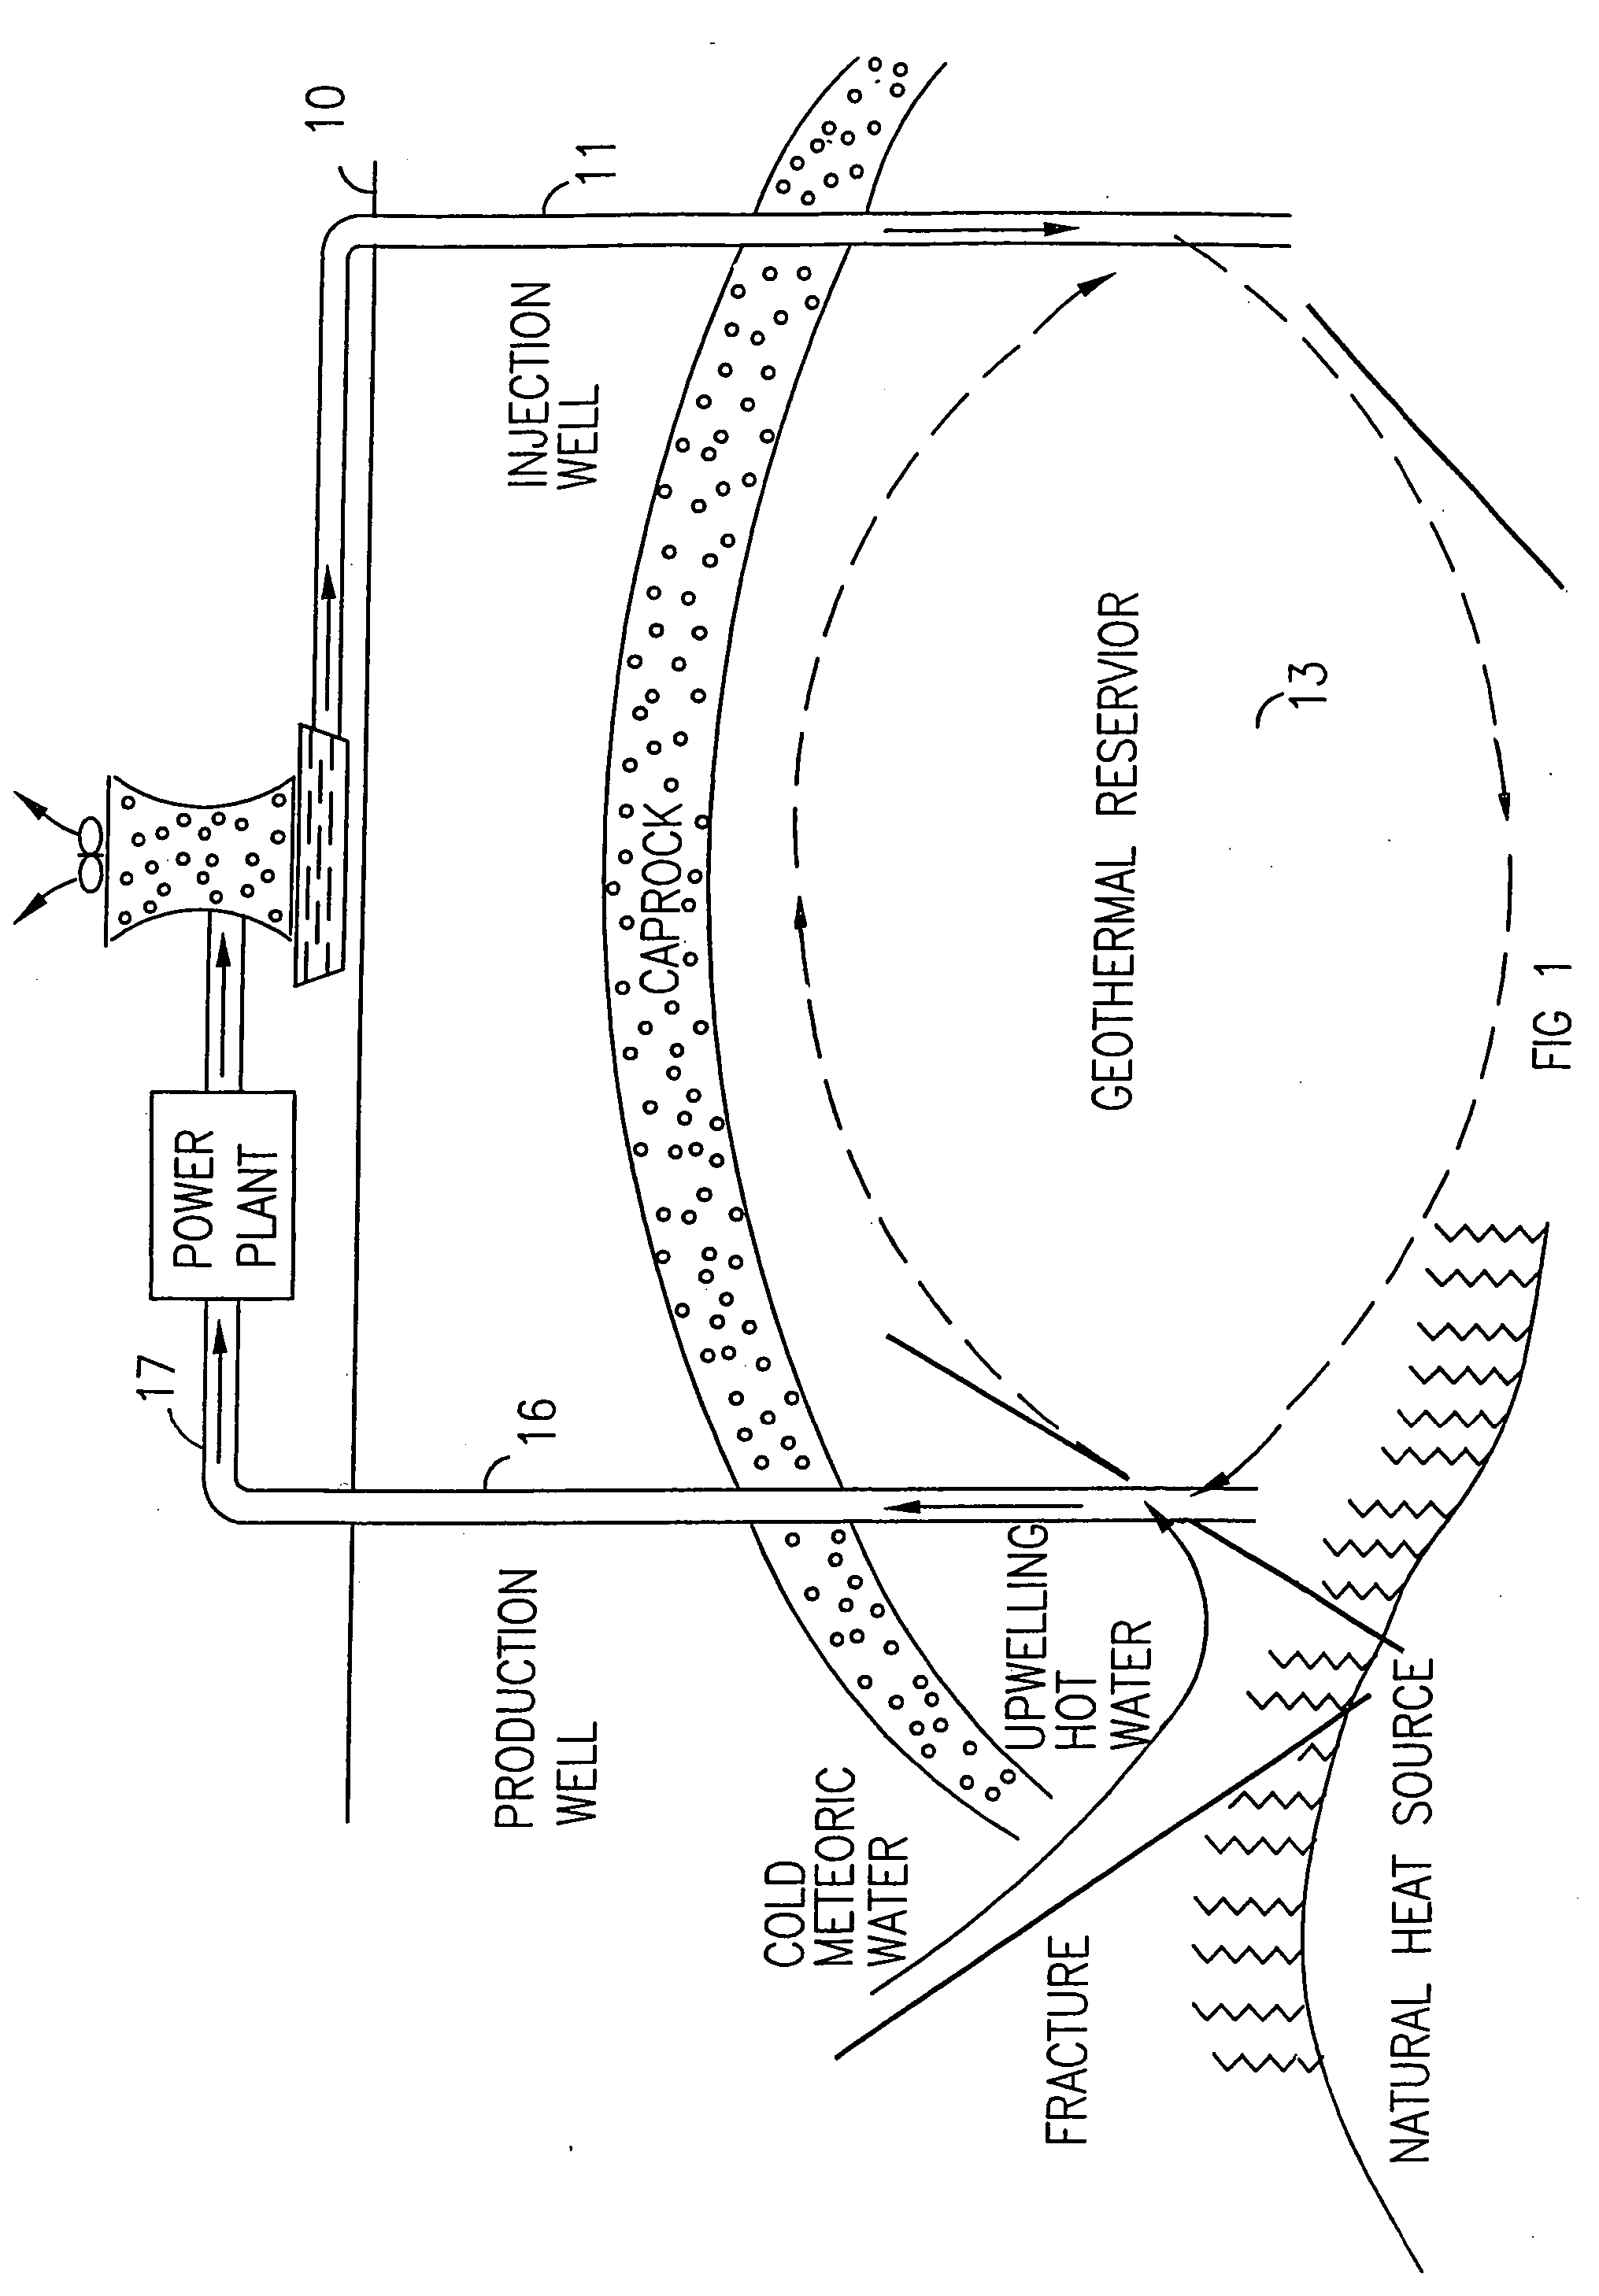 Method and apparatus for using geothermal energy for the production of power